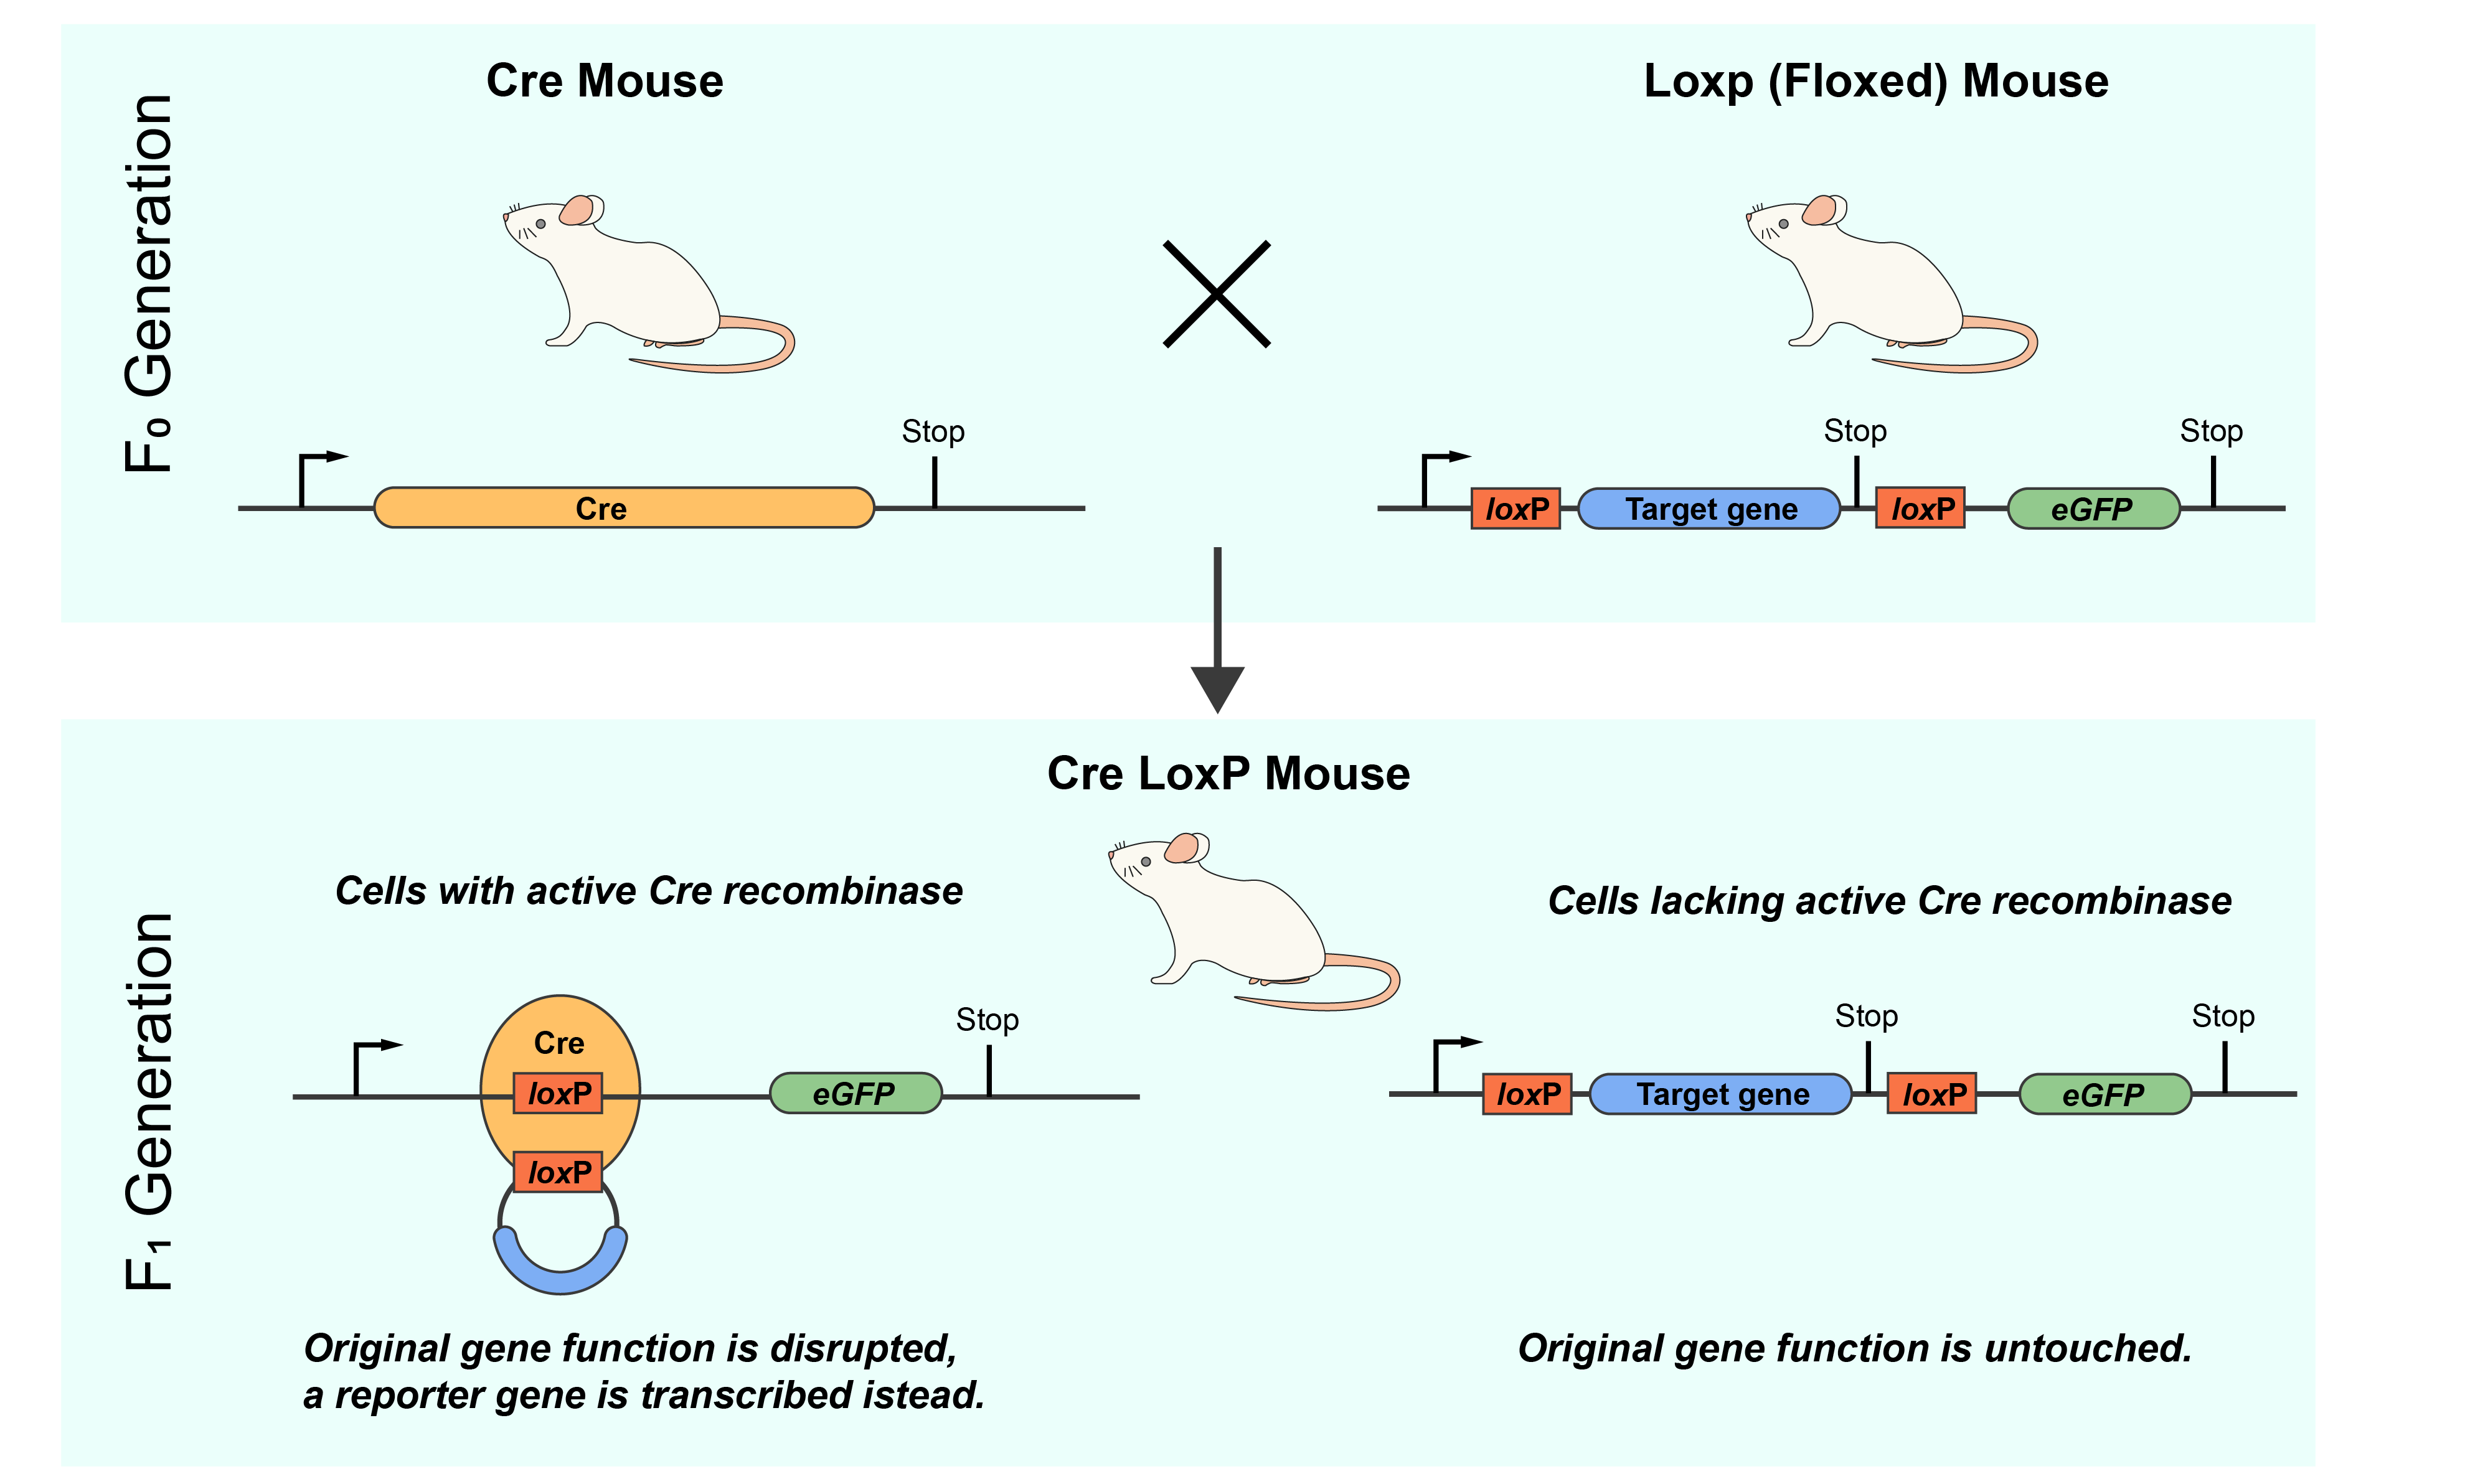  Mechanism of generation of tissue specific knockout mice using the cre-lox system.